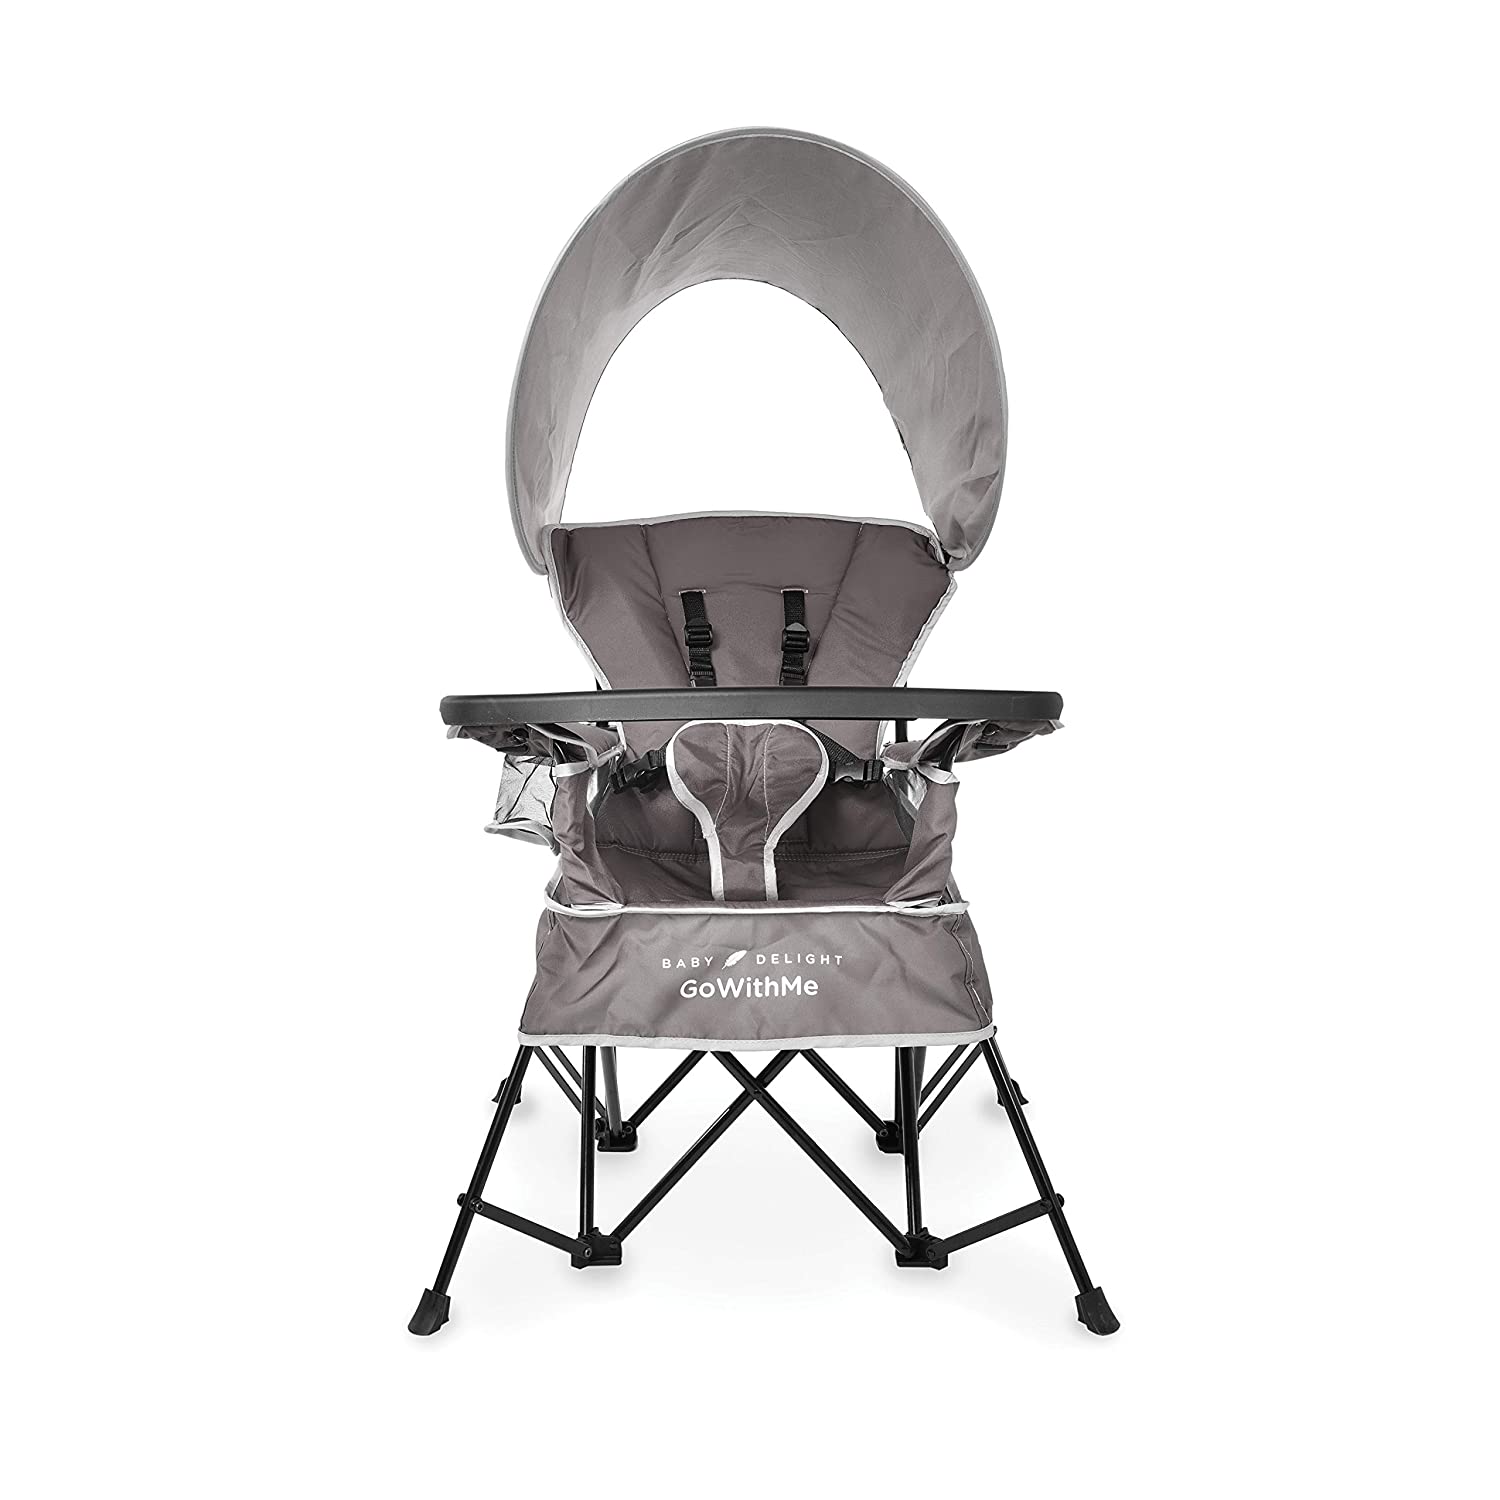 canopy chair - Best for Babies: Baby Delight Go with Me Chair